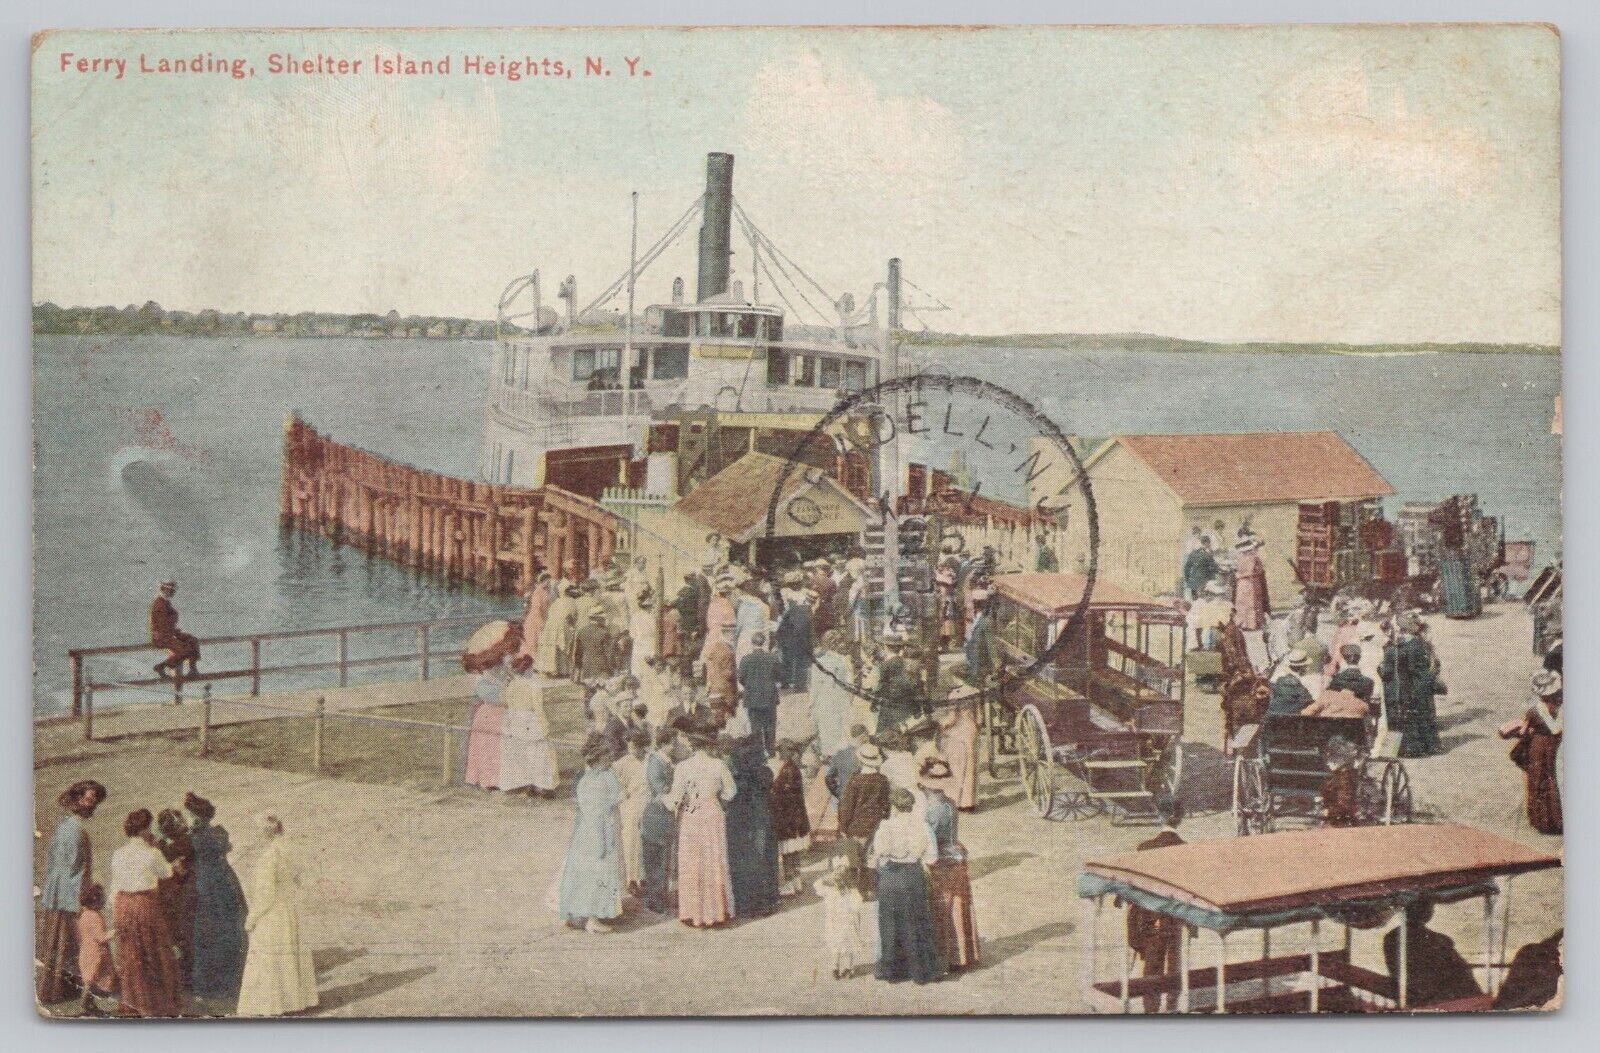 Ferry Landing at Shelter Island Heights, NY, Postcard, People, Carriages 0697